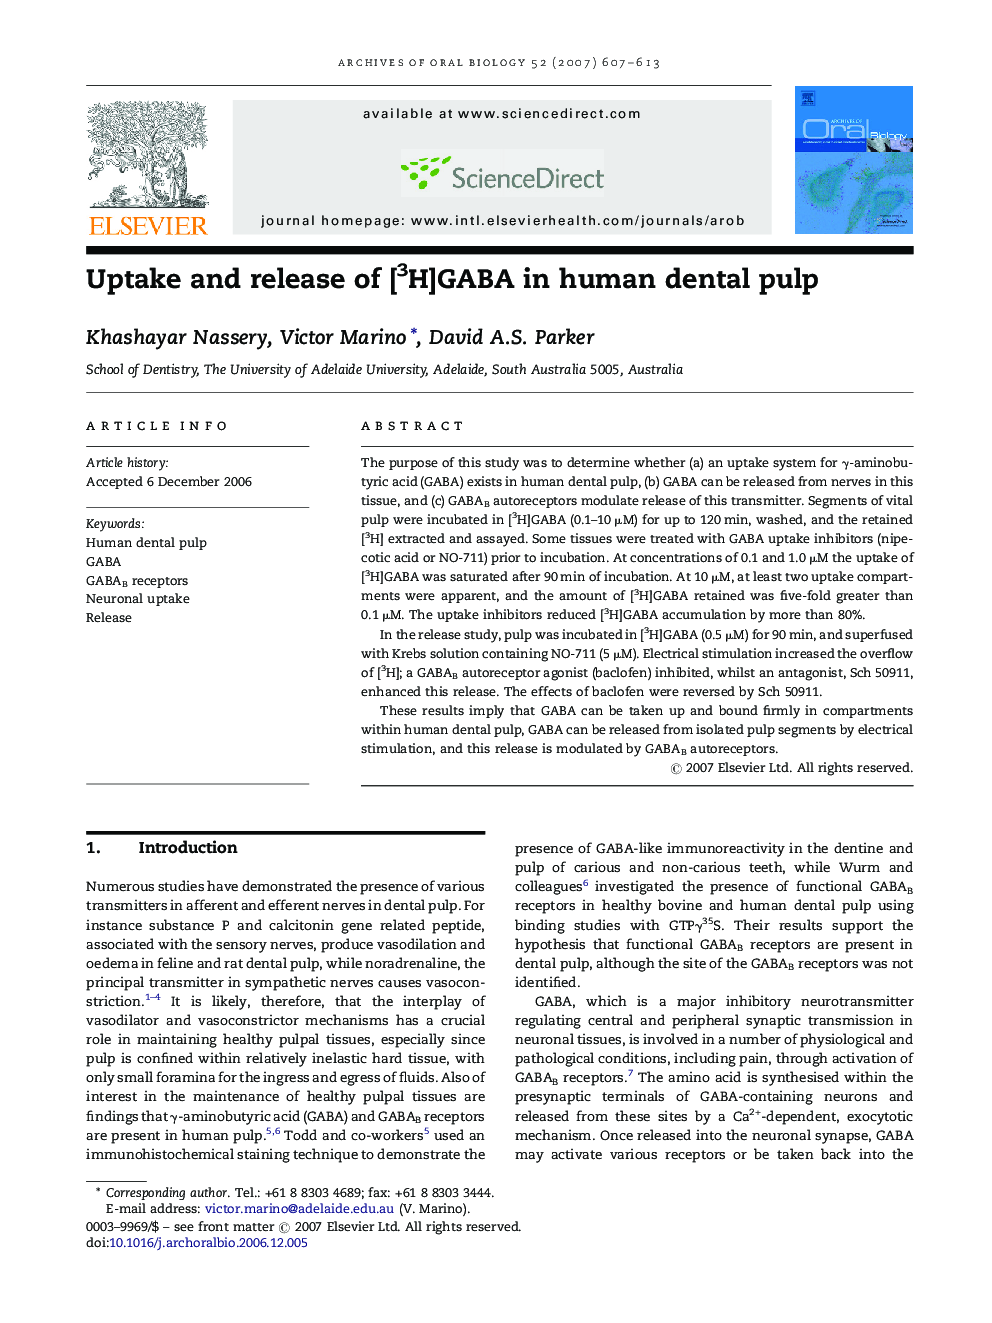 Uptake and release of [3H]GABA in human dental pulp